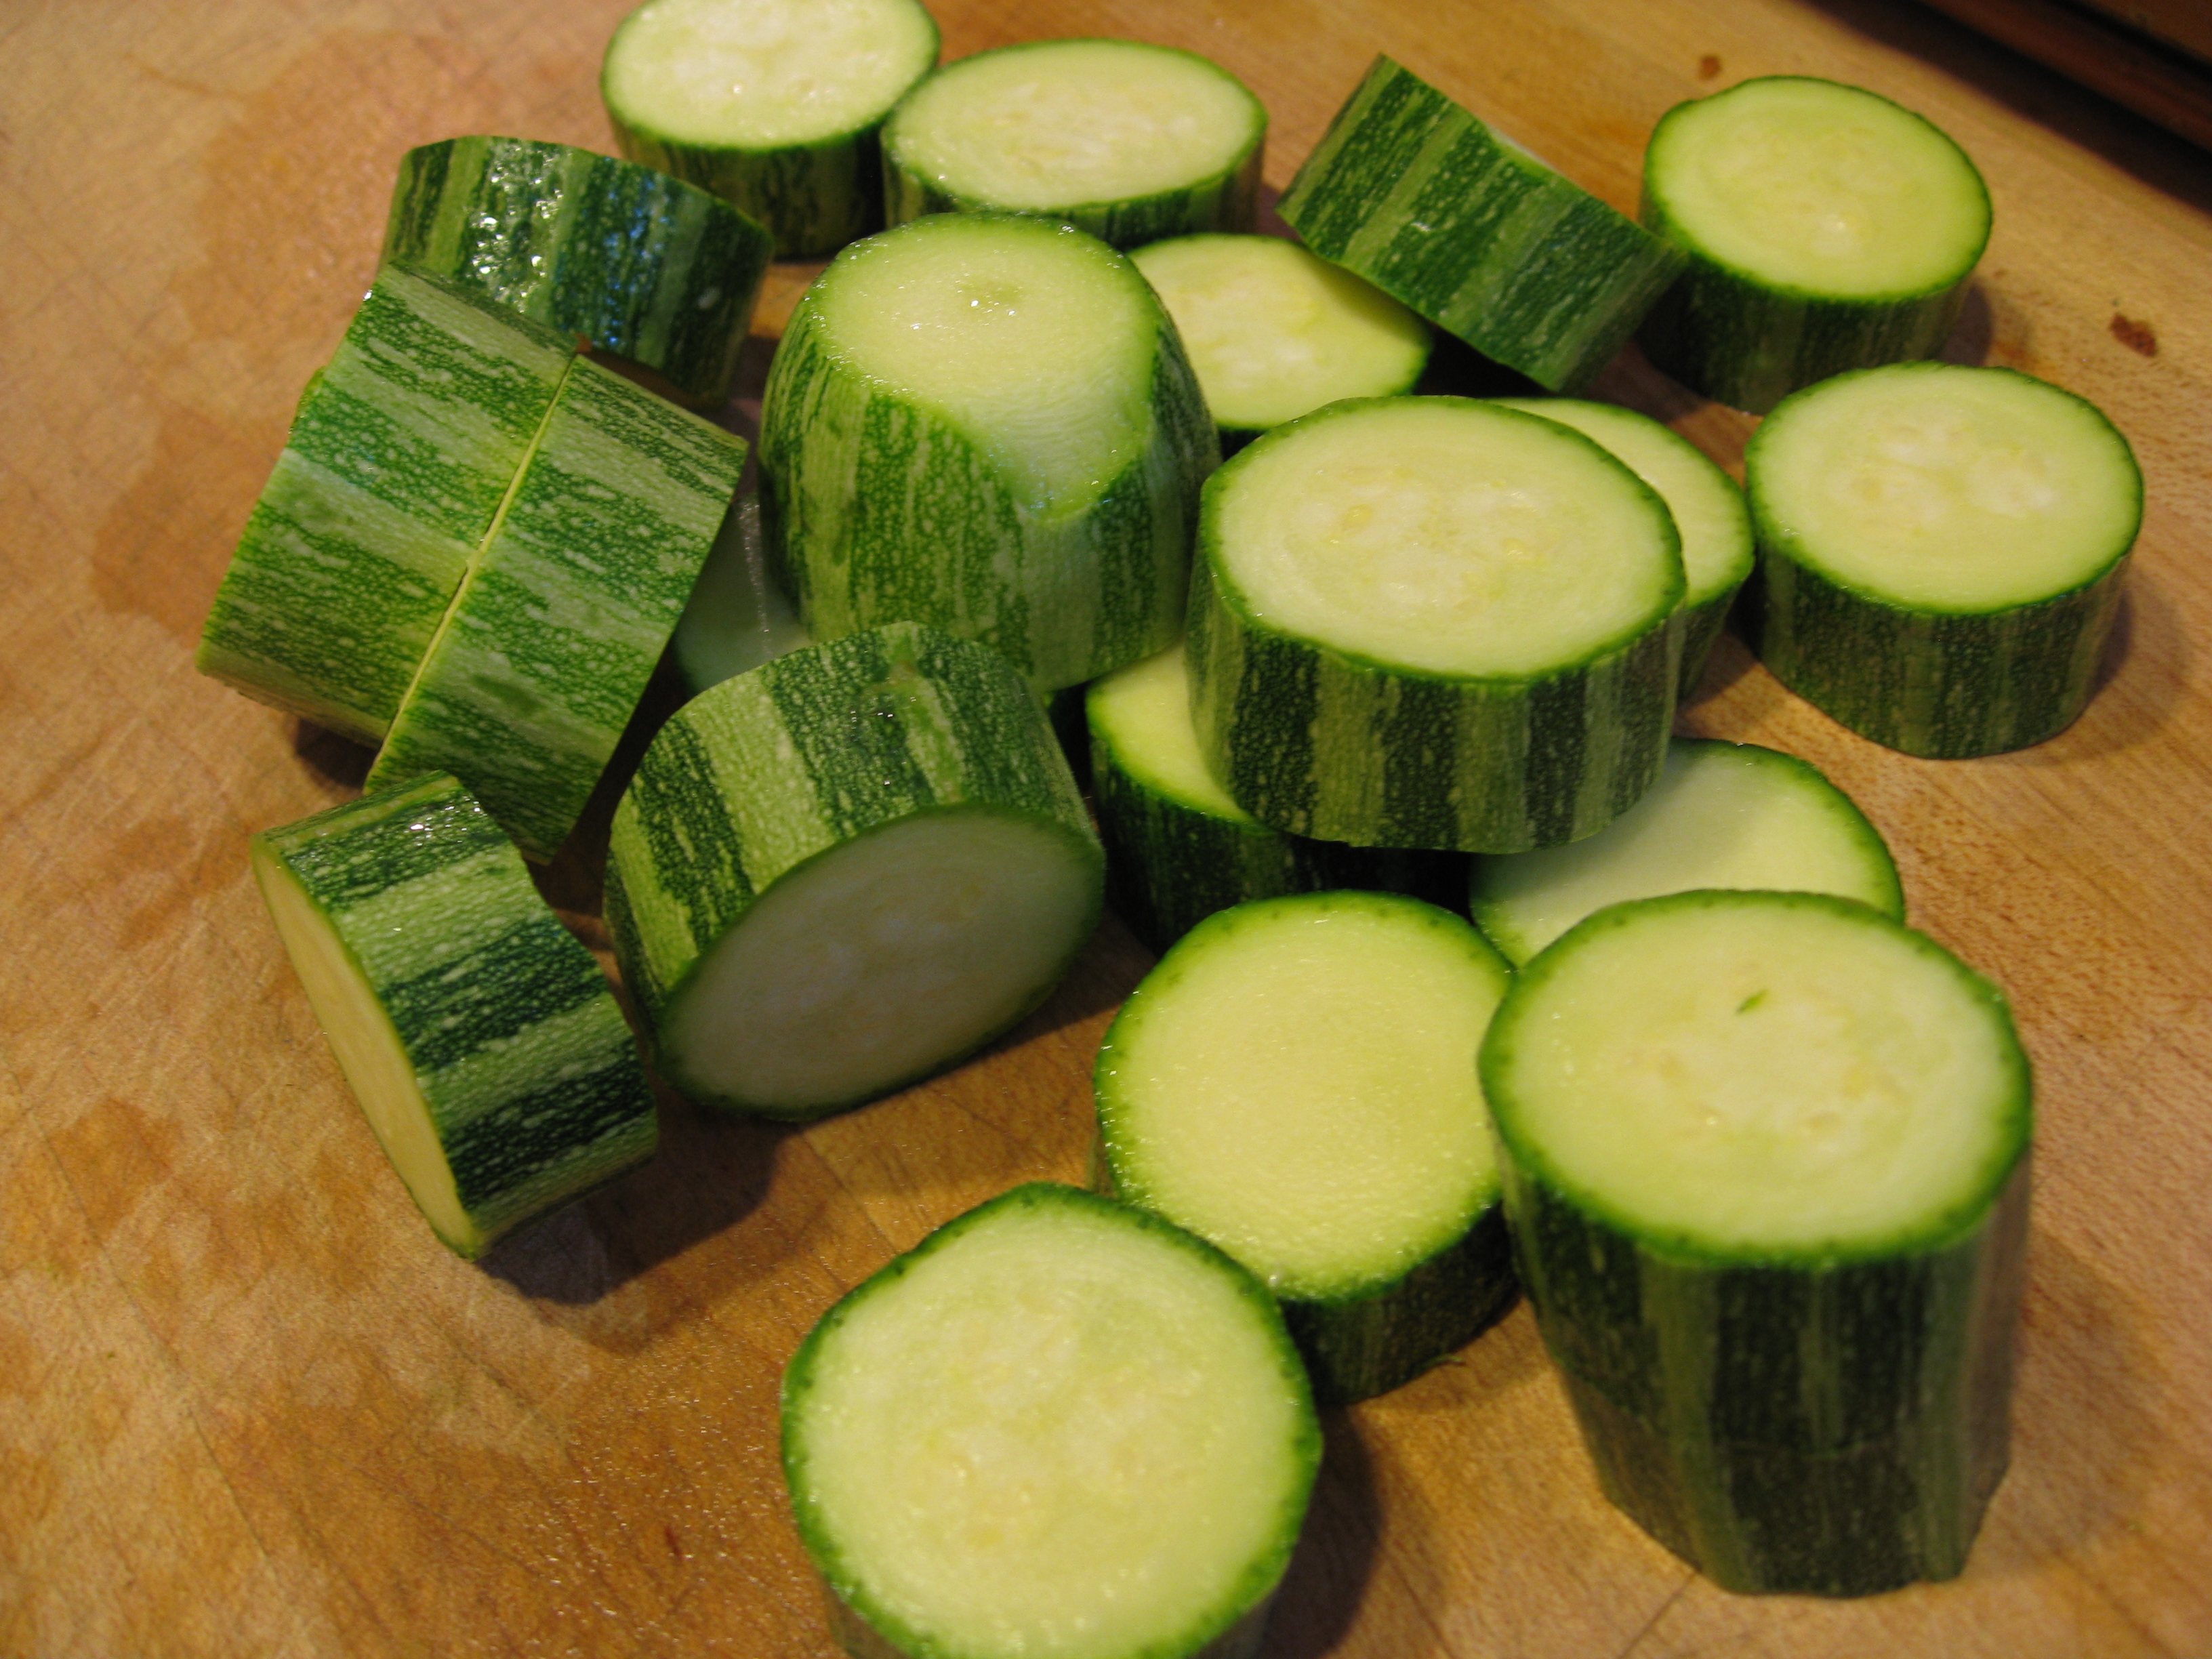 We used Cocozelle Italian zucchini - cool stripes!